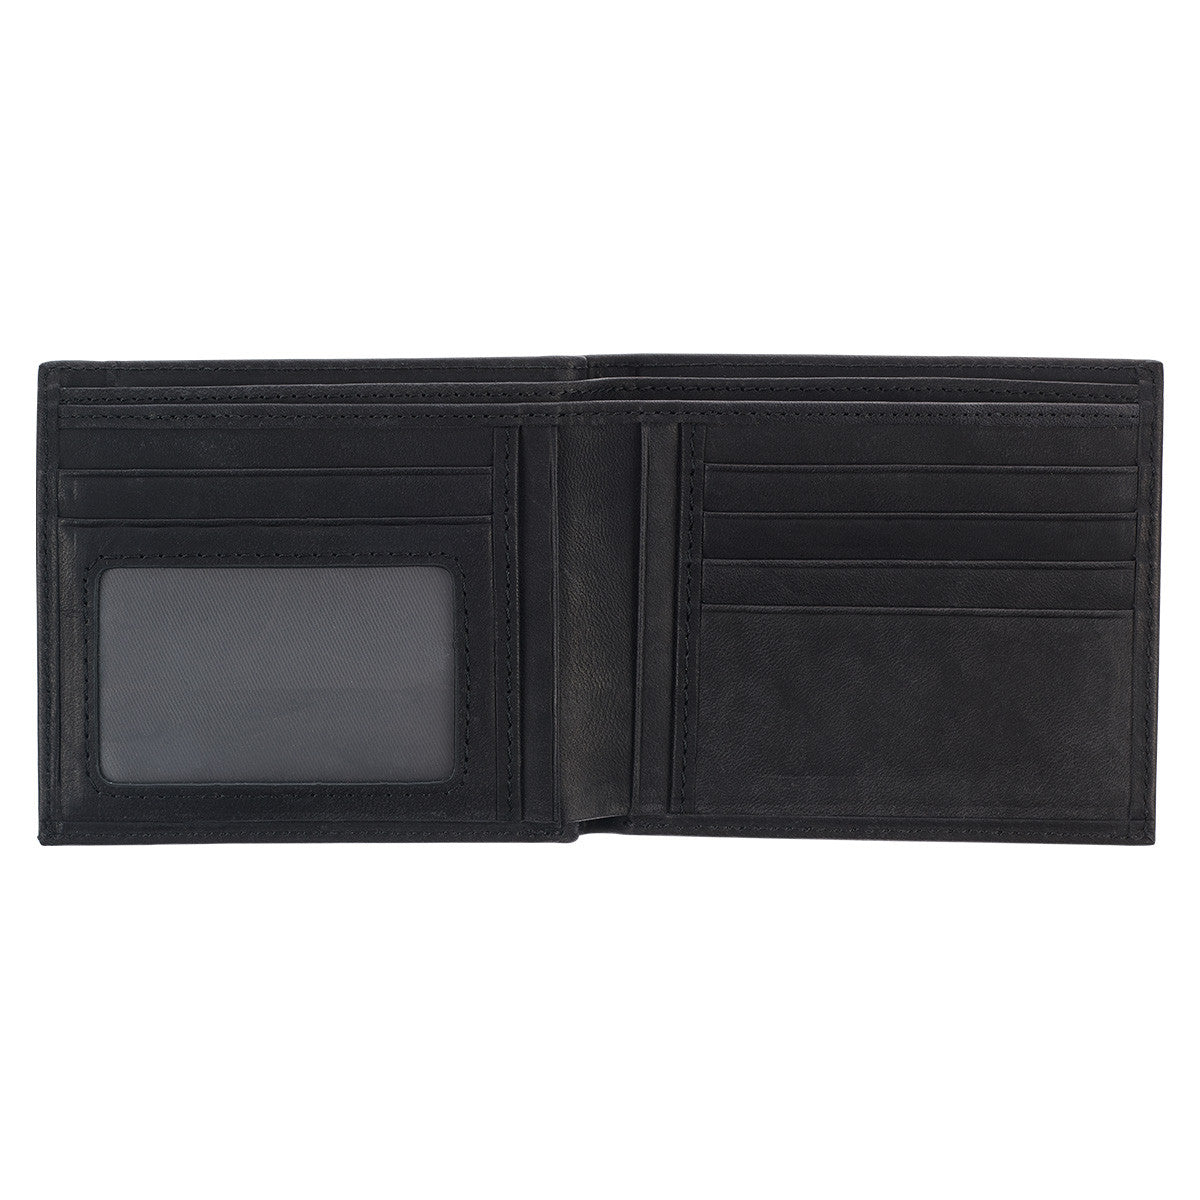 Silver Cross Black Genuine Leather Wallet - The Christian Gift Company